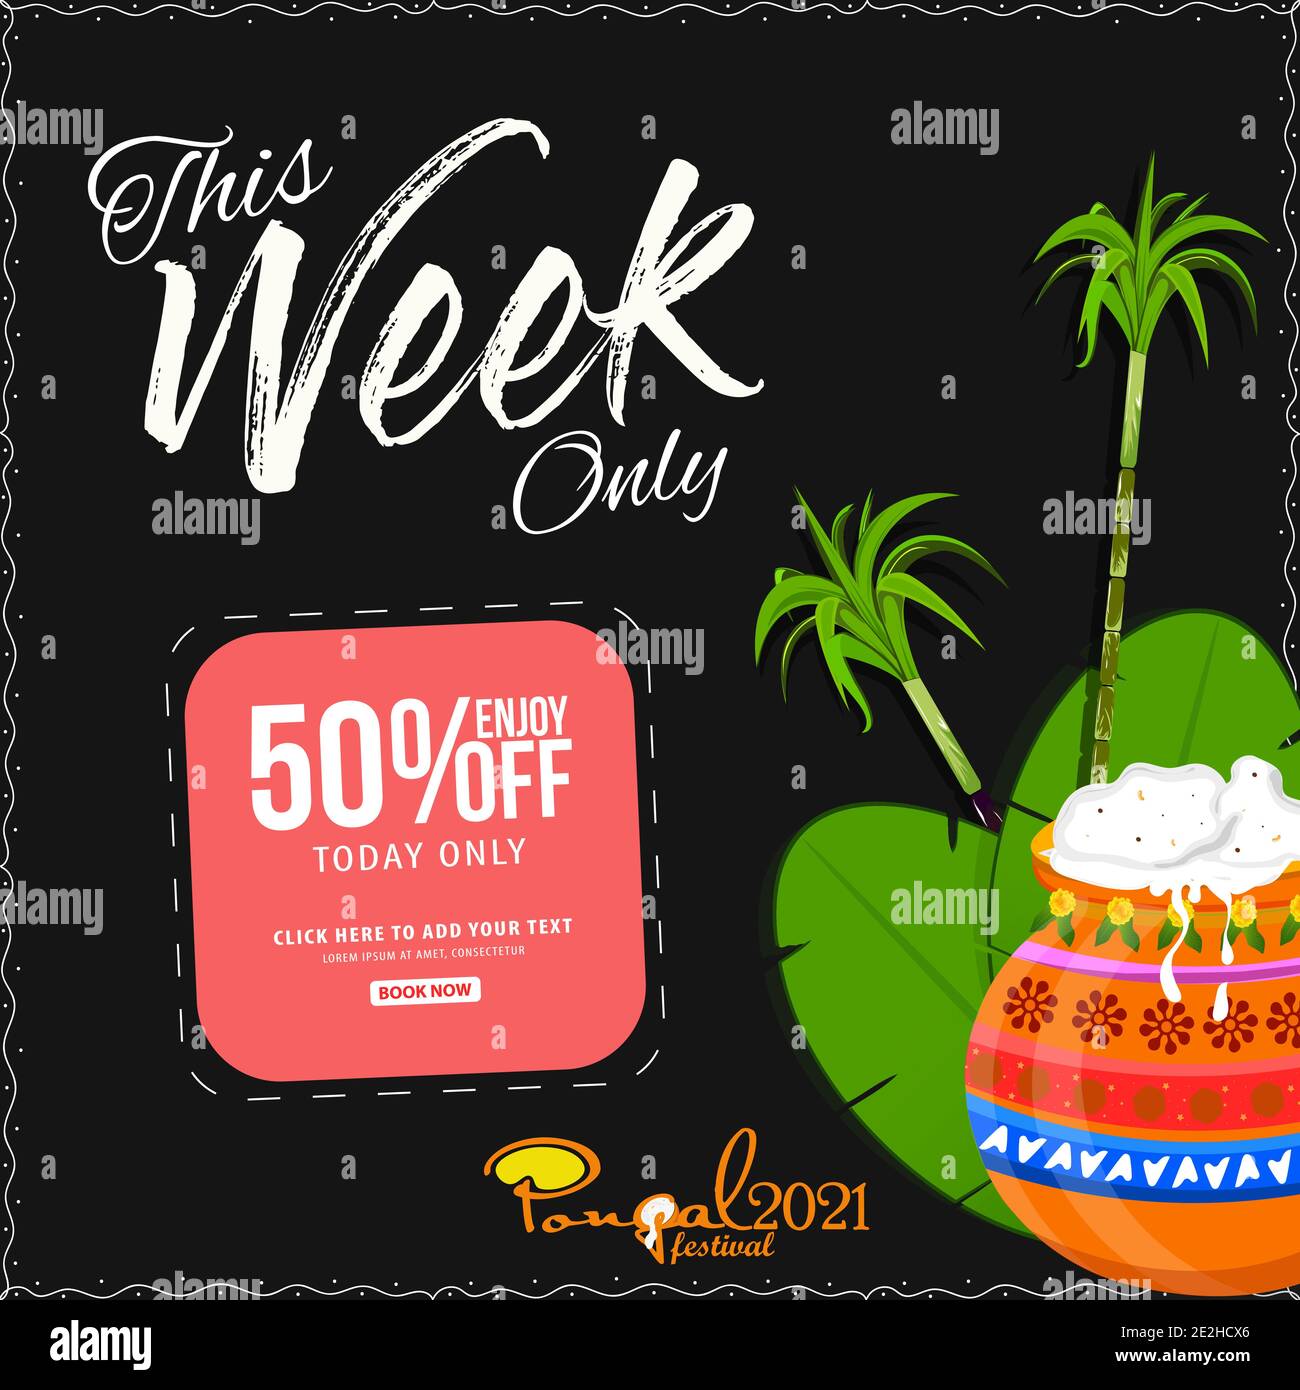 Pongal Festival Sale Template Design with 50% Discount Offers, Social Media Post Templates Stock Vector